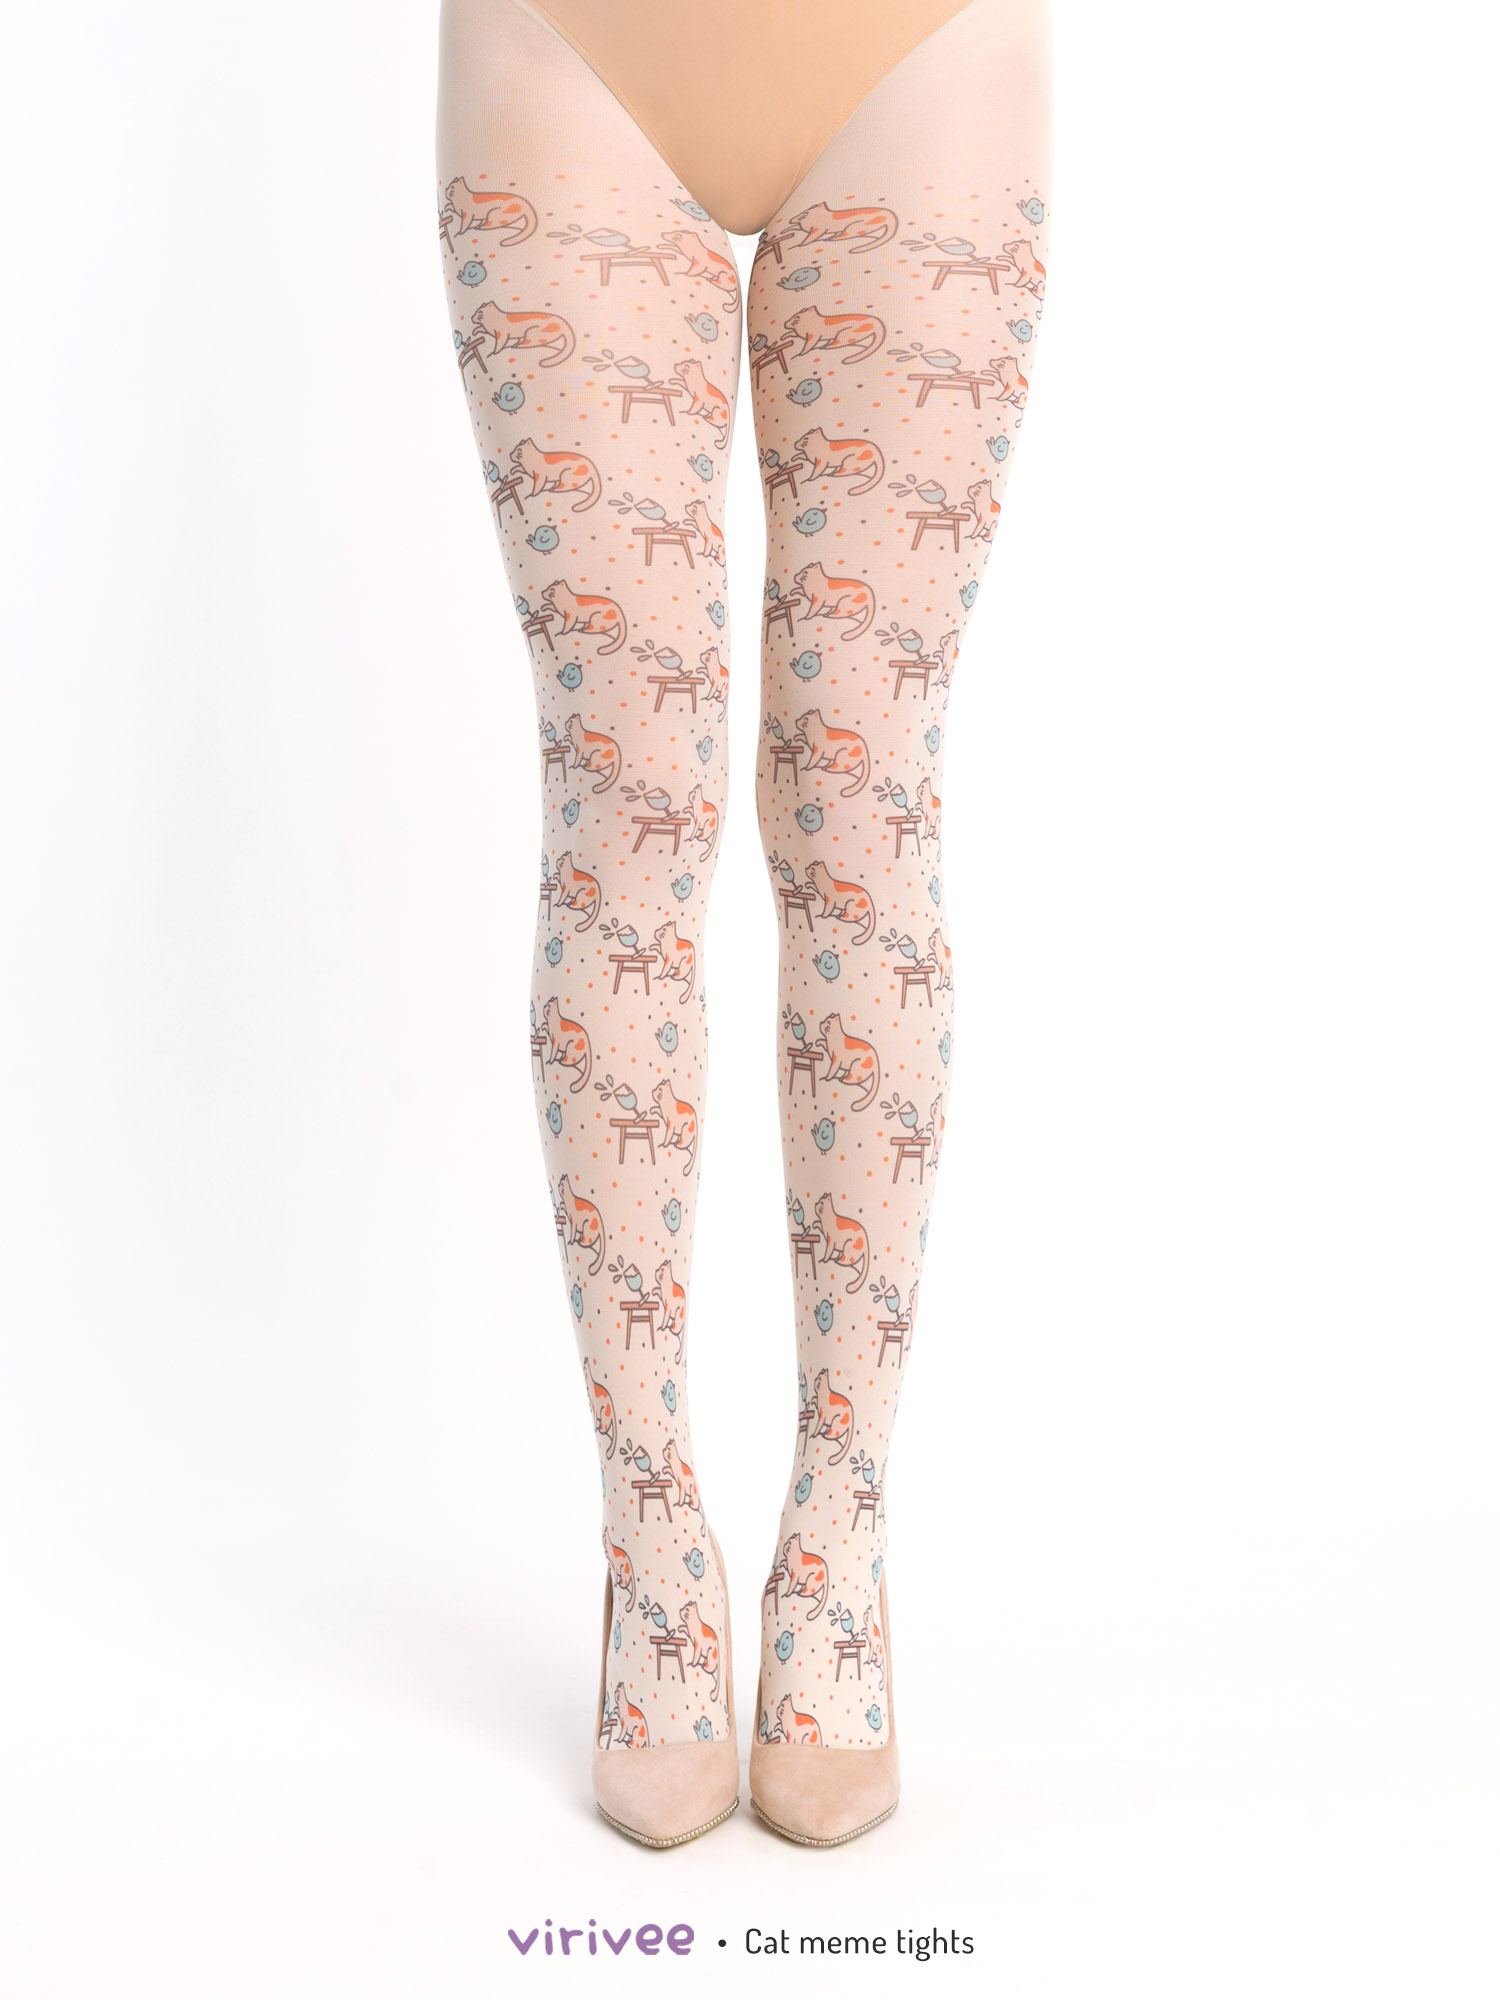 Cat with glass meme tights by Virivee